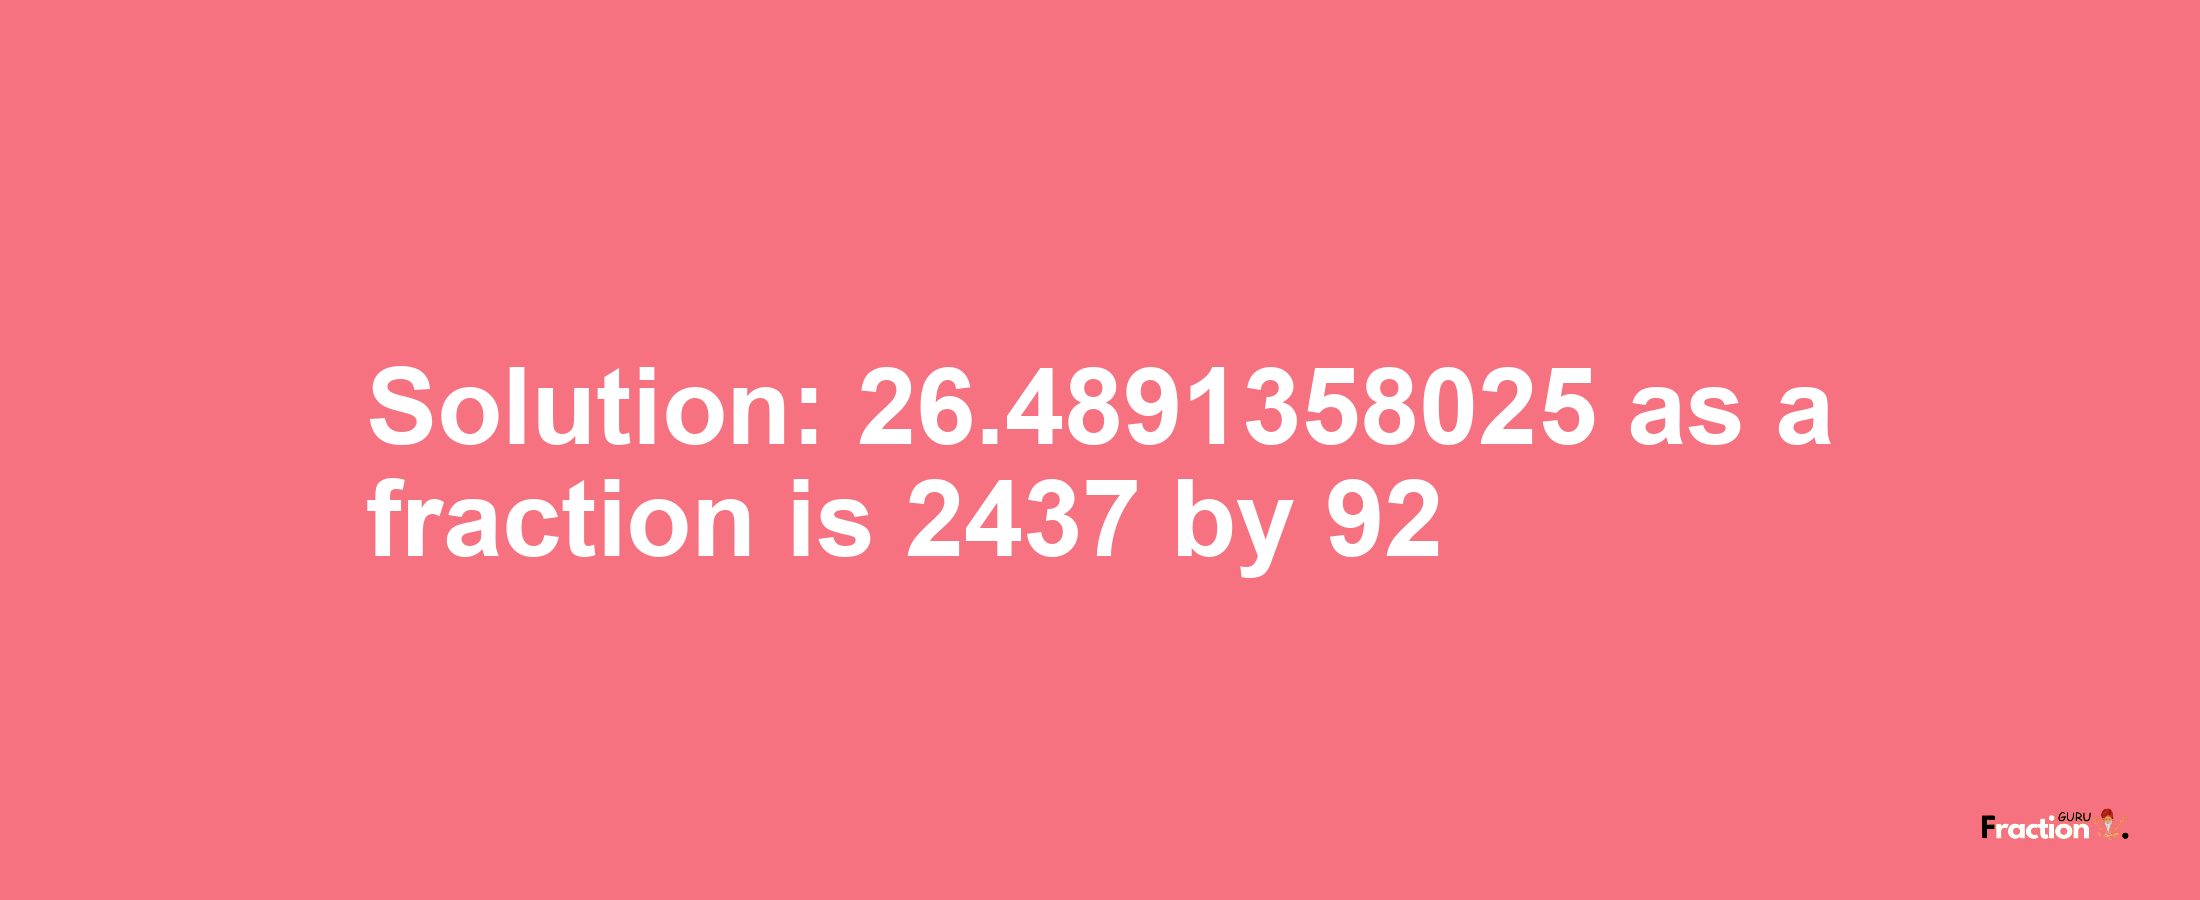 Solution:26.4891358025 as a fraction is 2437/92